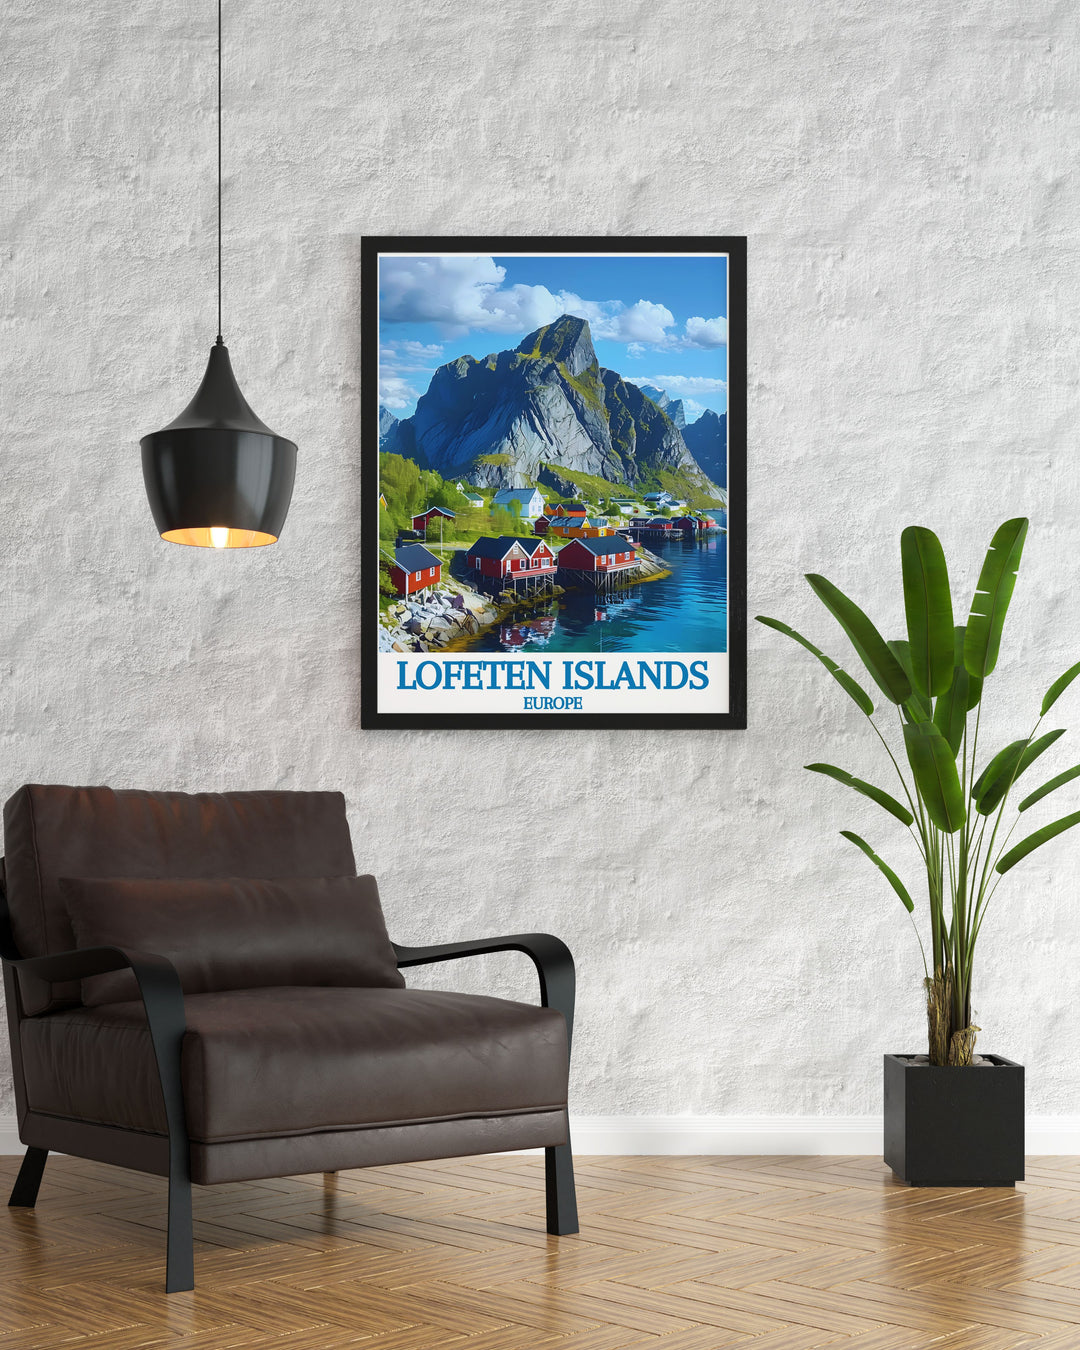 Framed art print of the Lofoten Islands, Norway, highlighting the serene beauty of Hamnøy. The artwork features the picturesque red cabins, the majestic mountains, and the clear fjord waters, offering a beautiful blend of natural beauty and Scandinavian charm. The detailed illustration and vibrant colors make this framed art a standout piece in any home decor.